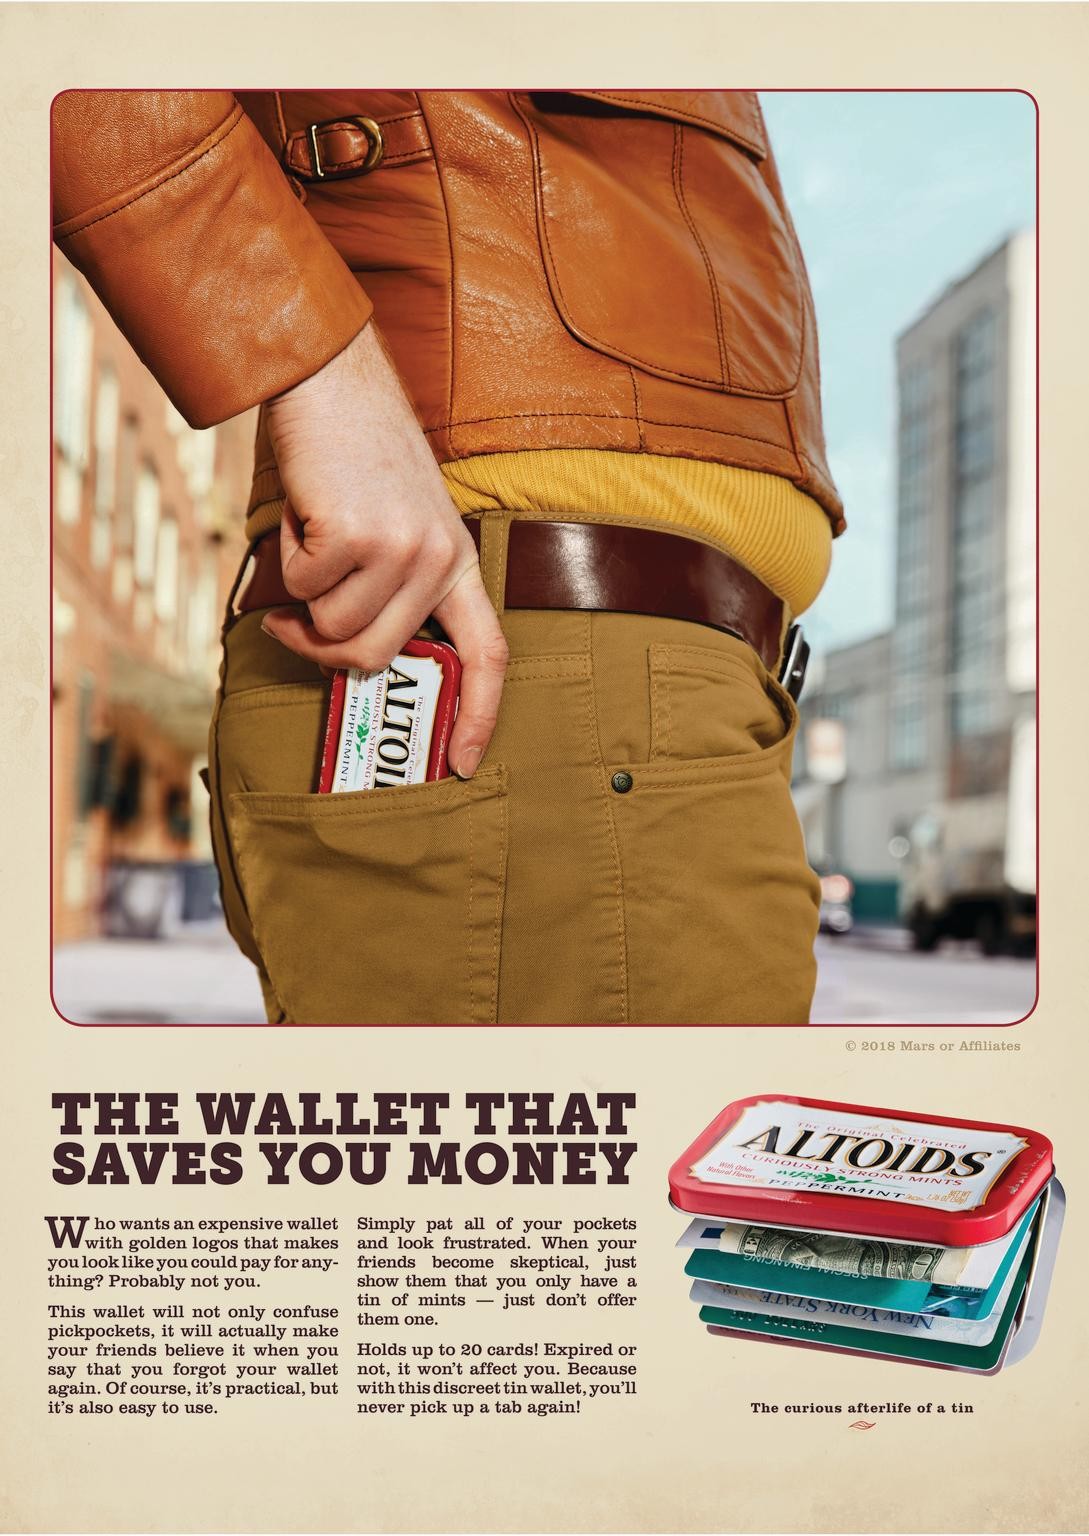 Altoids "The Curious Afterlife of a Tin"